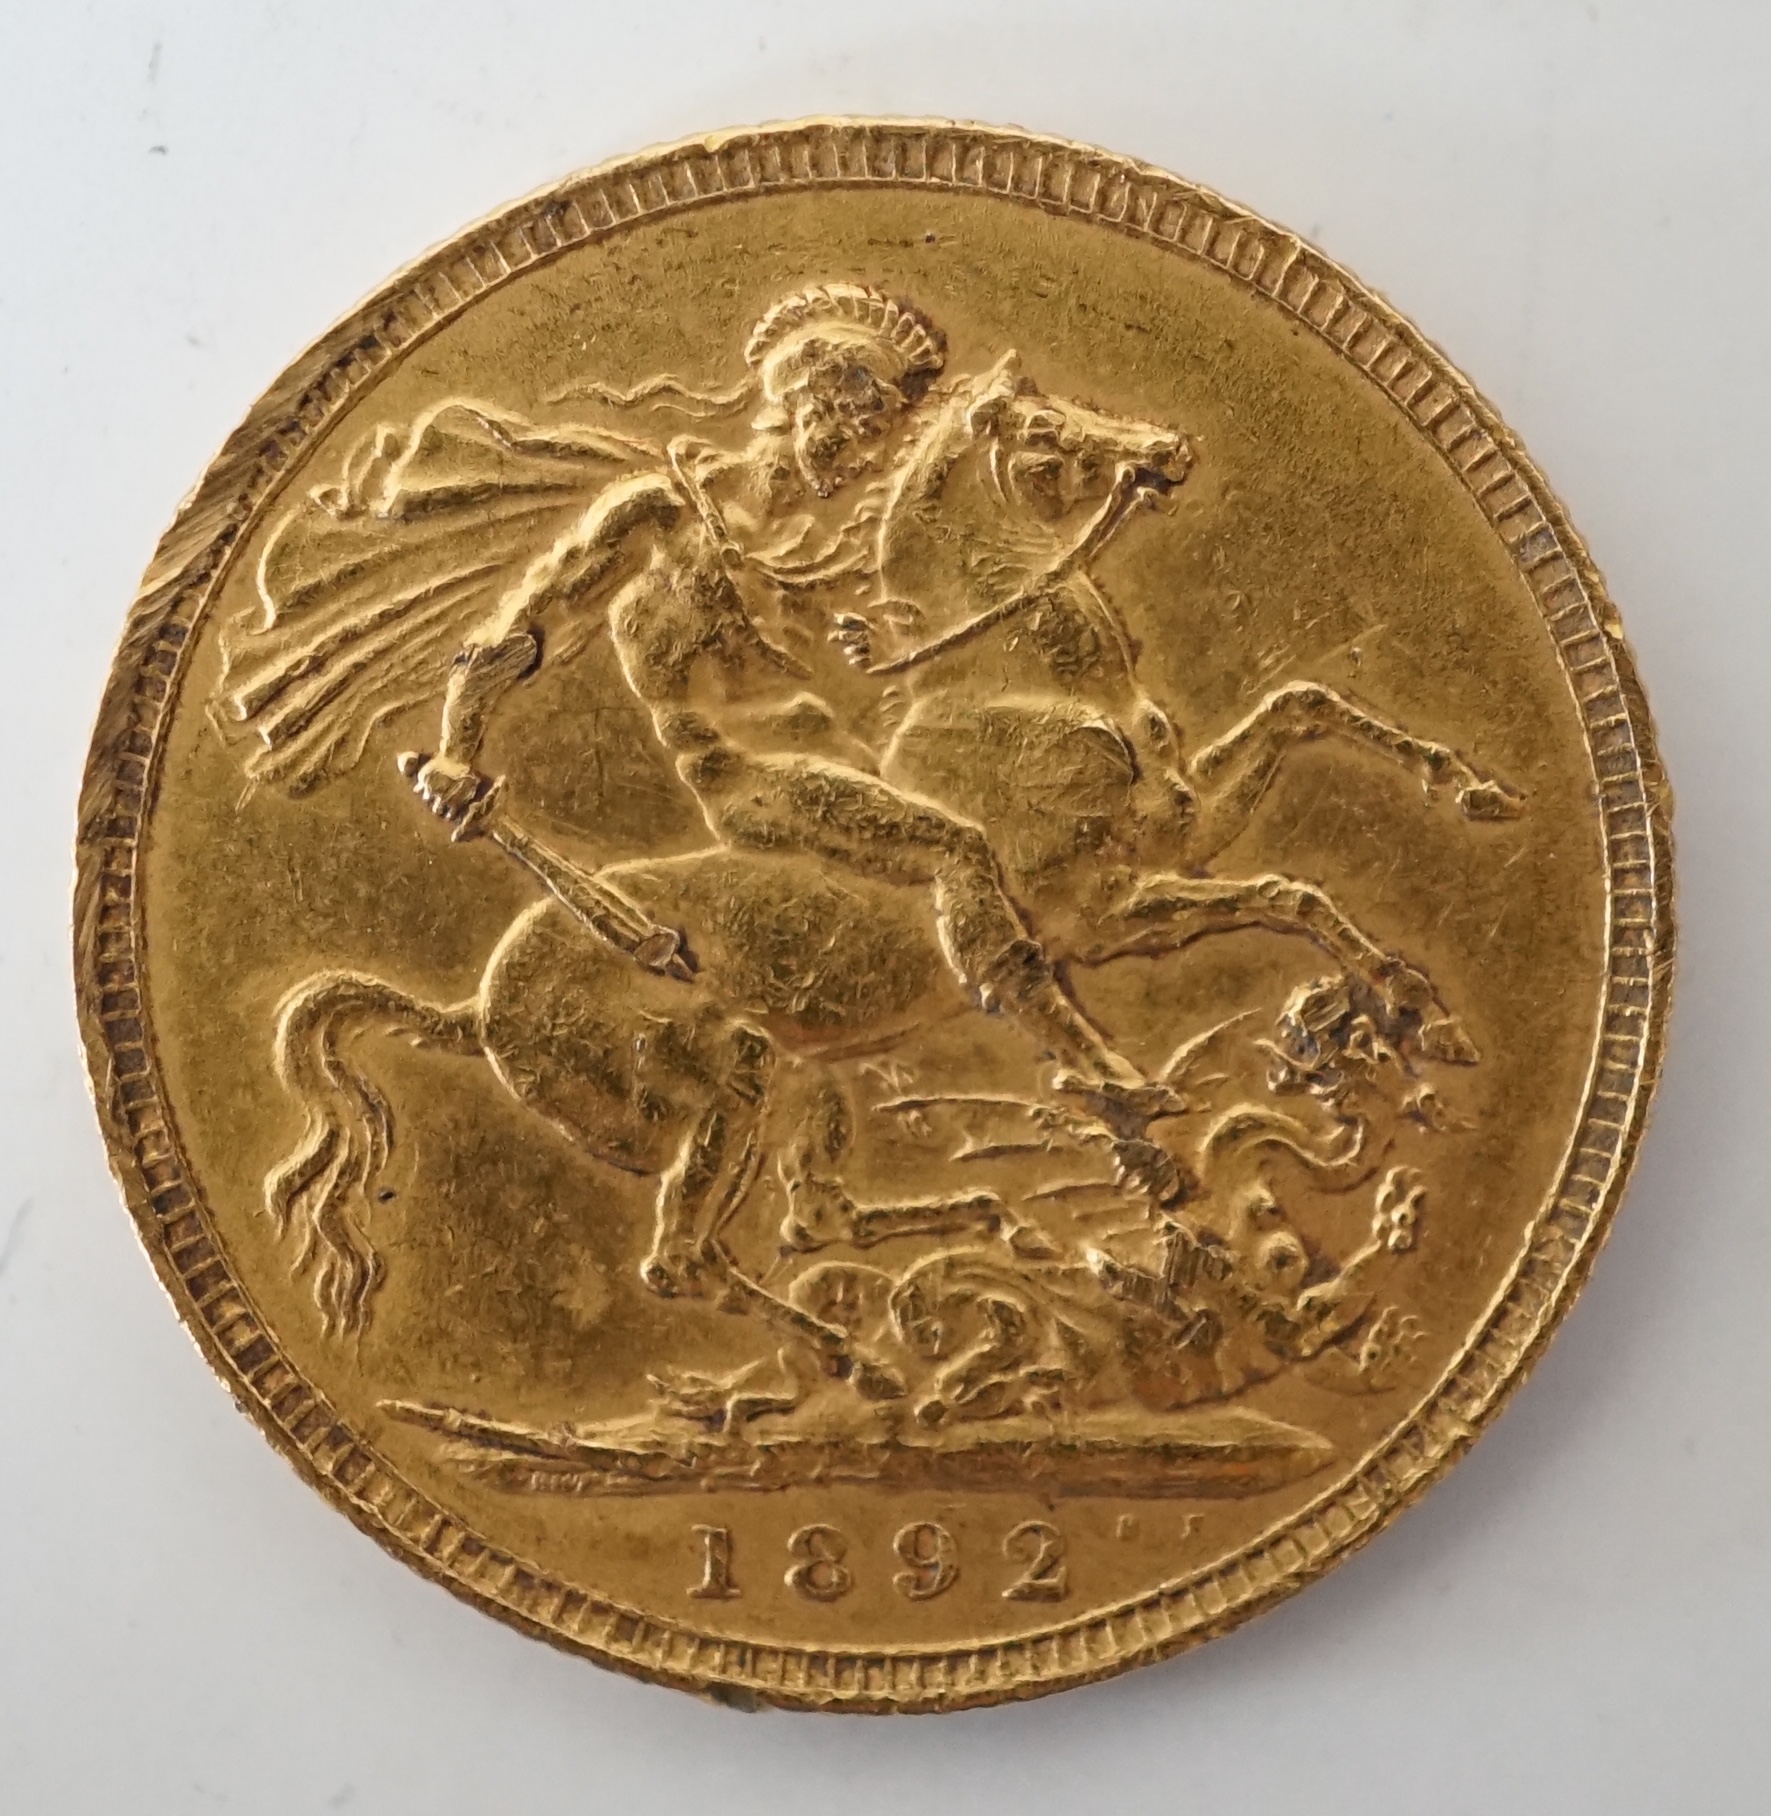 British gold coins, Victoria sovereign, 1892, Jubilee head (S3866C), small file mark on edge otherwise good VF